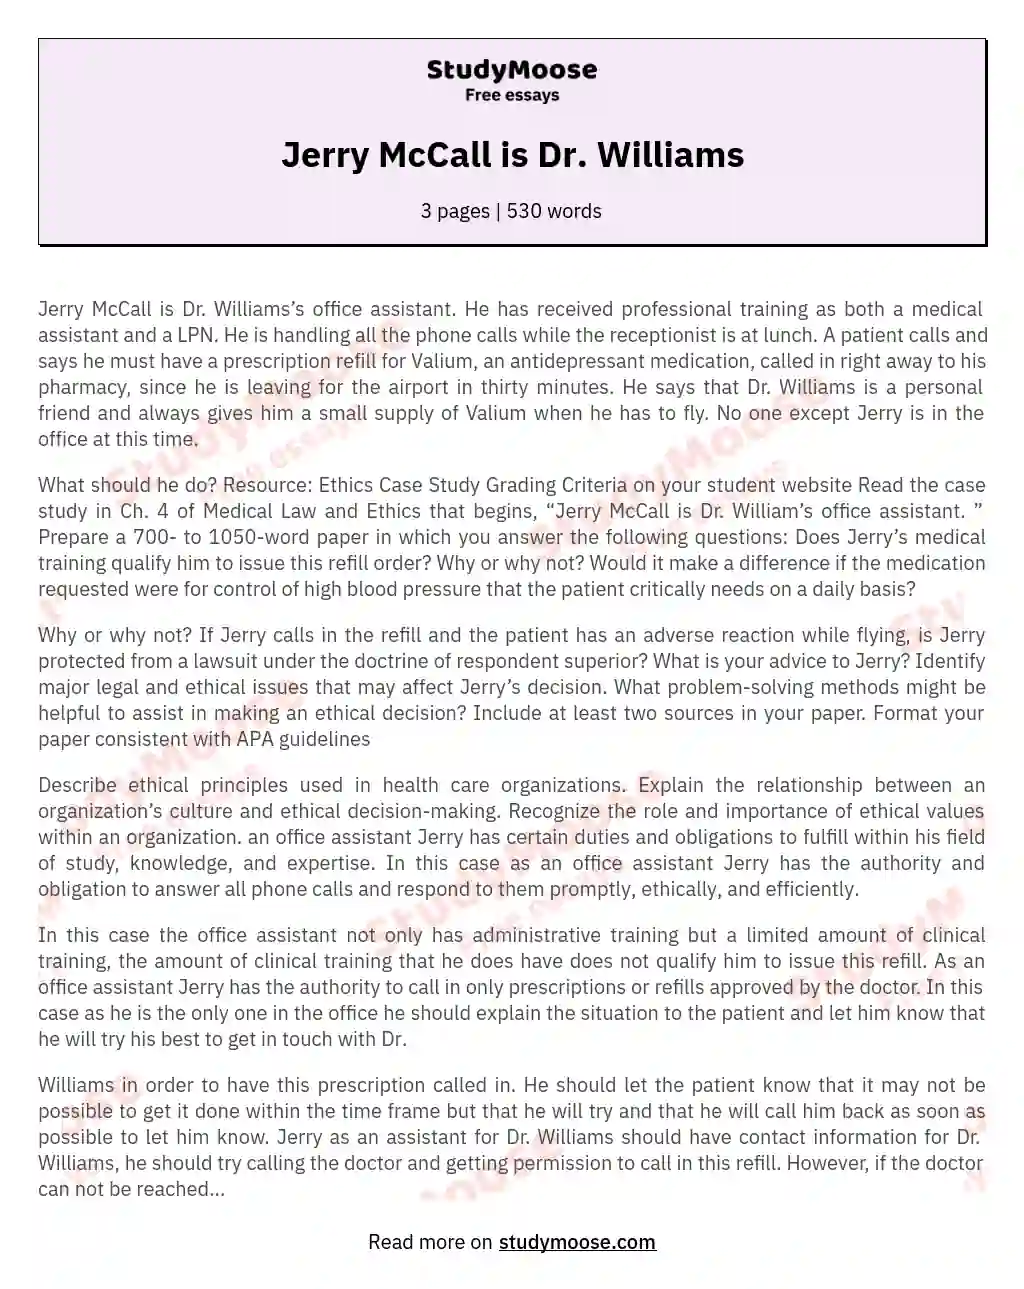 Jerry McCall is Dr. Williams essay